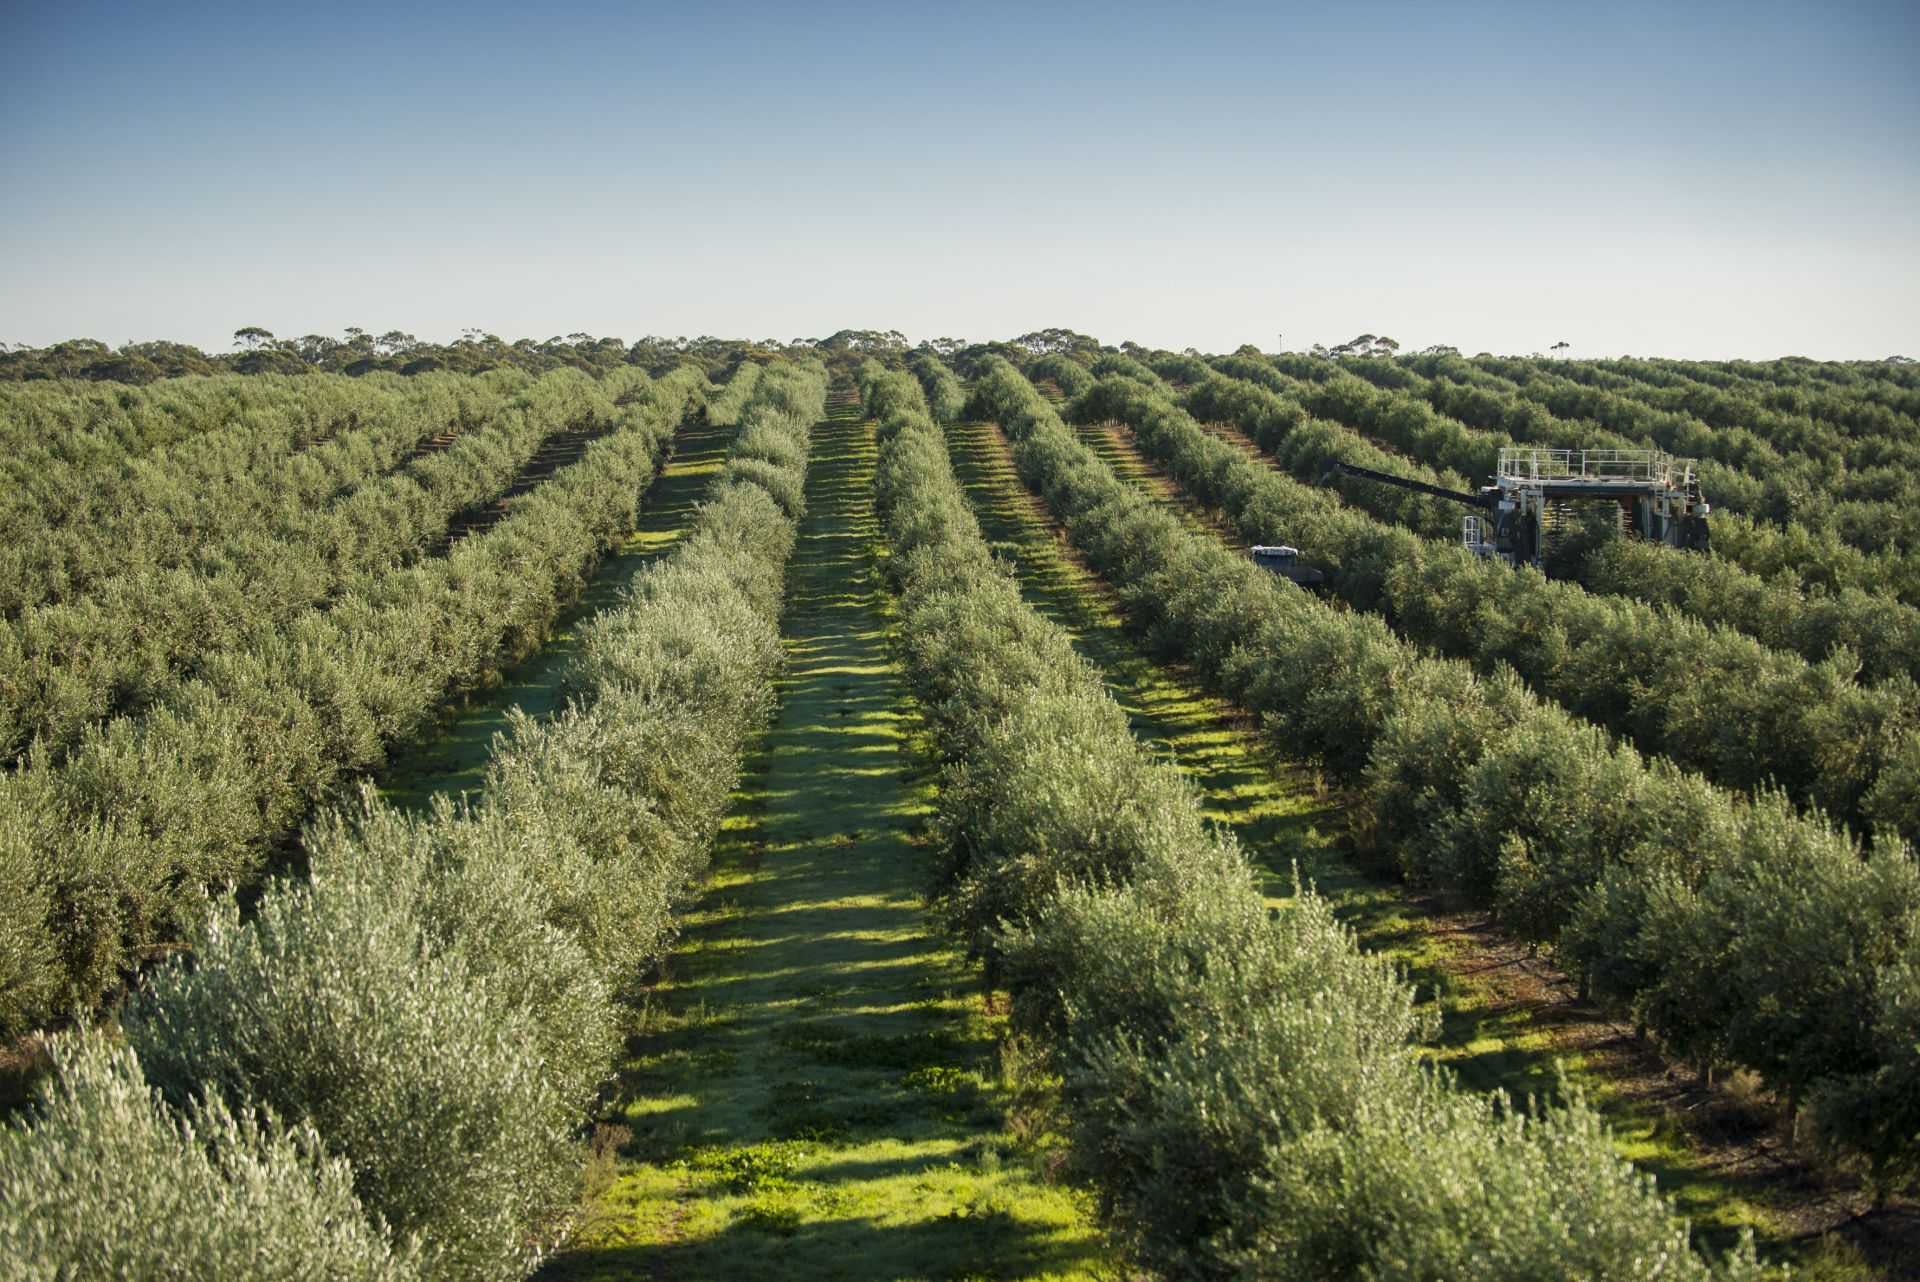 australia-and-new-zealand-business-production-after-years-of-drought-and-covid-australians-celebrate-recordbreaking-harvest-olive-oil-times